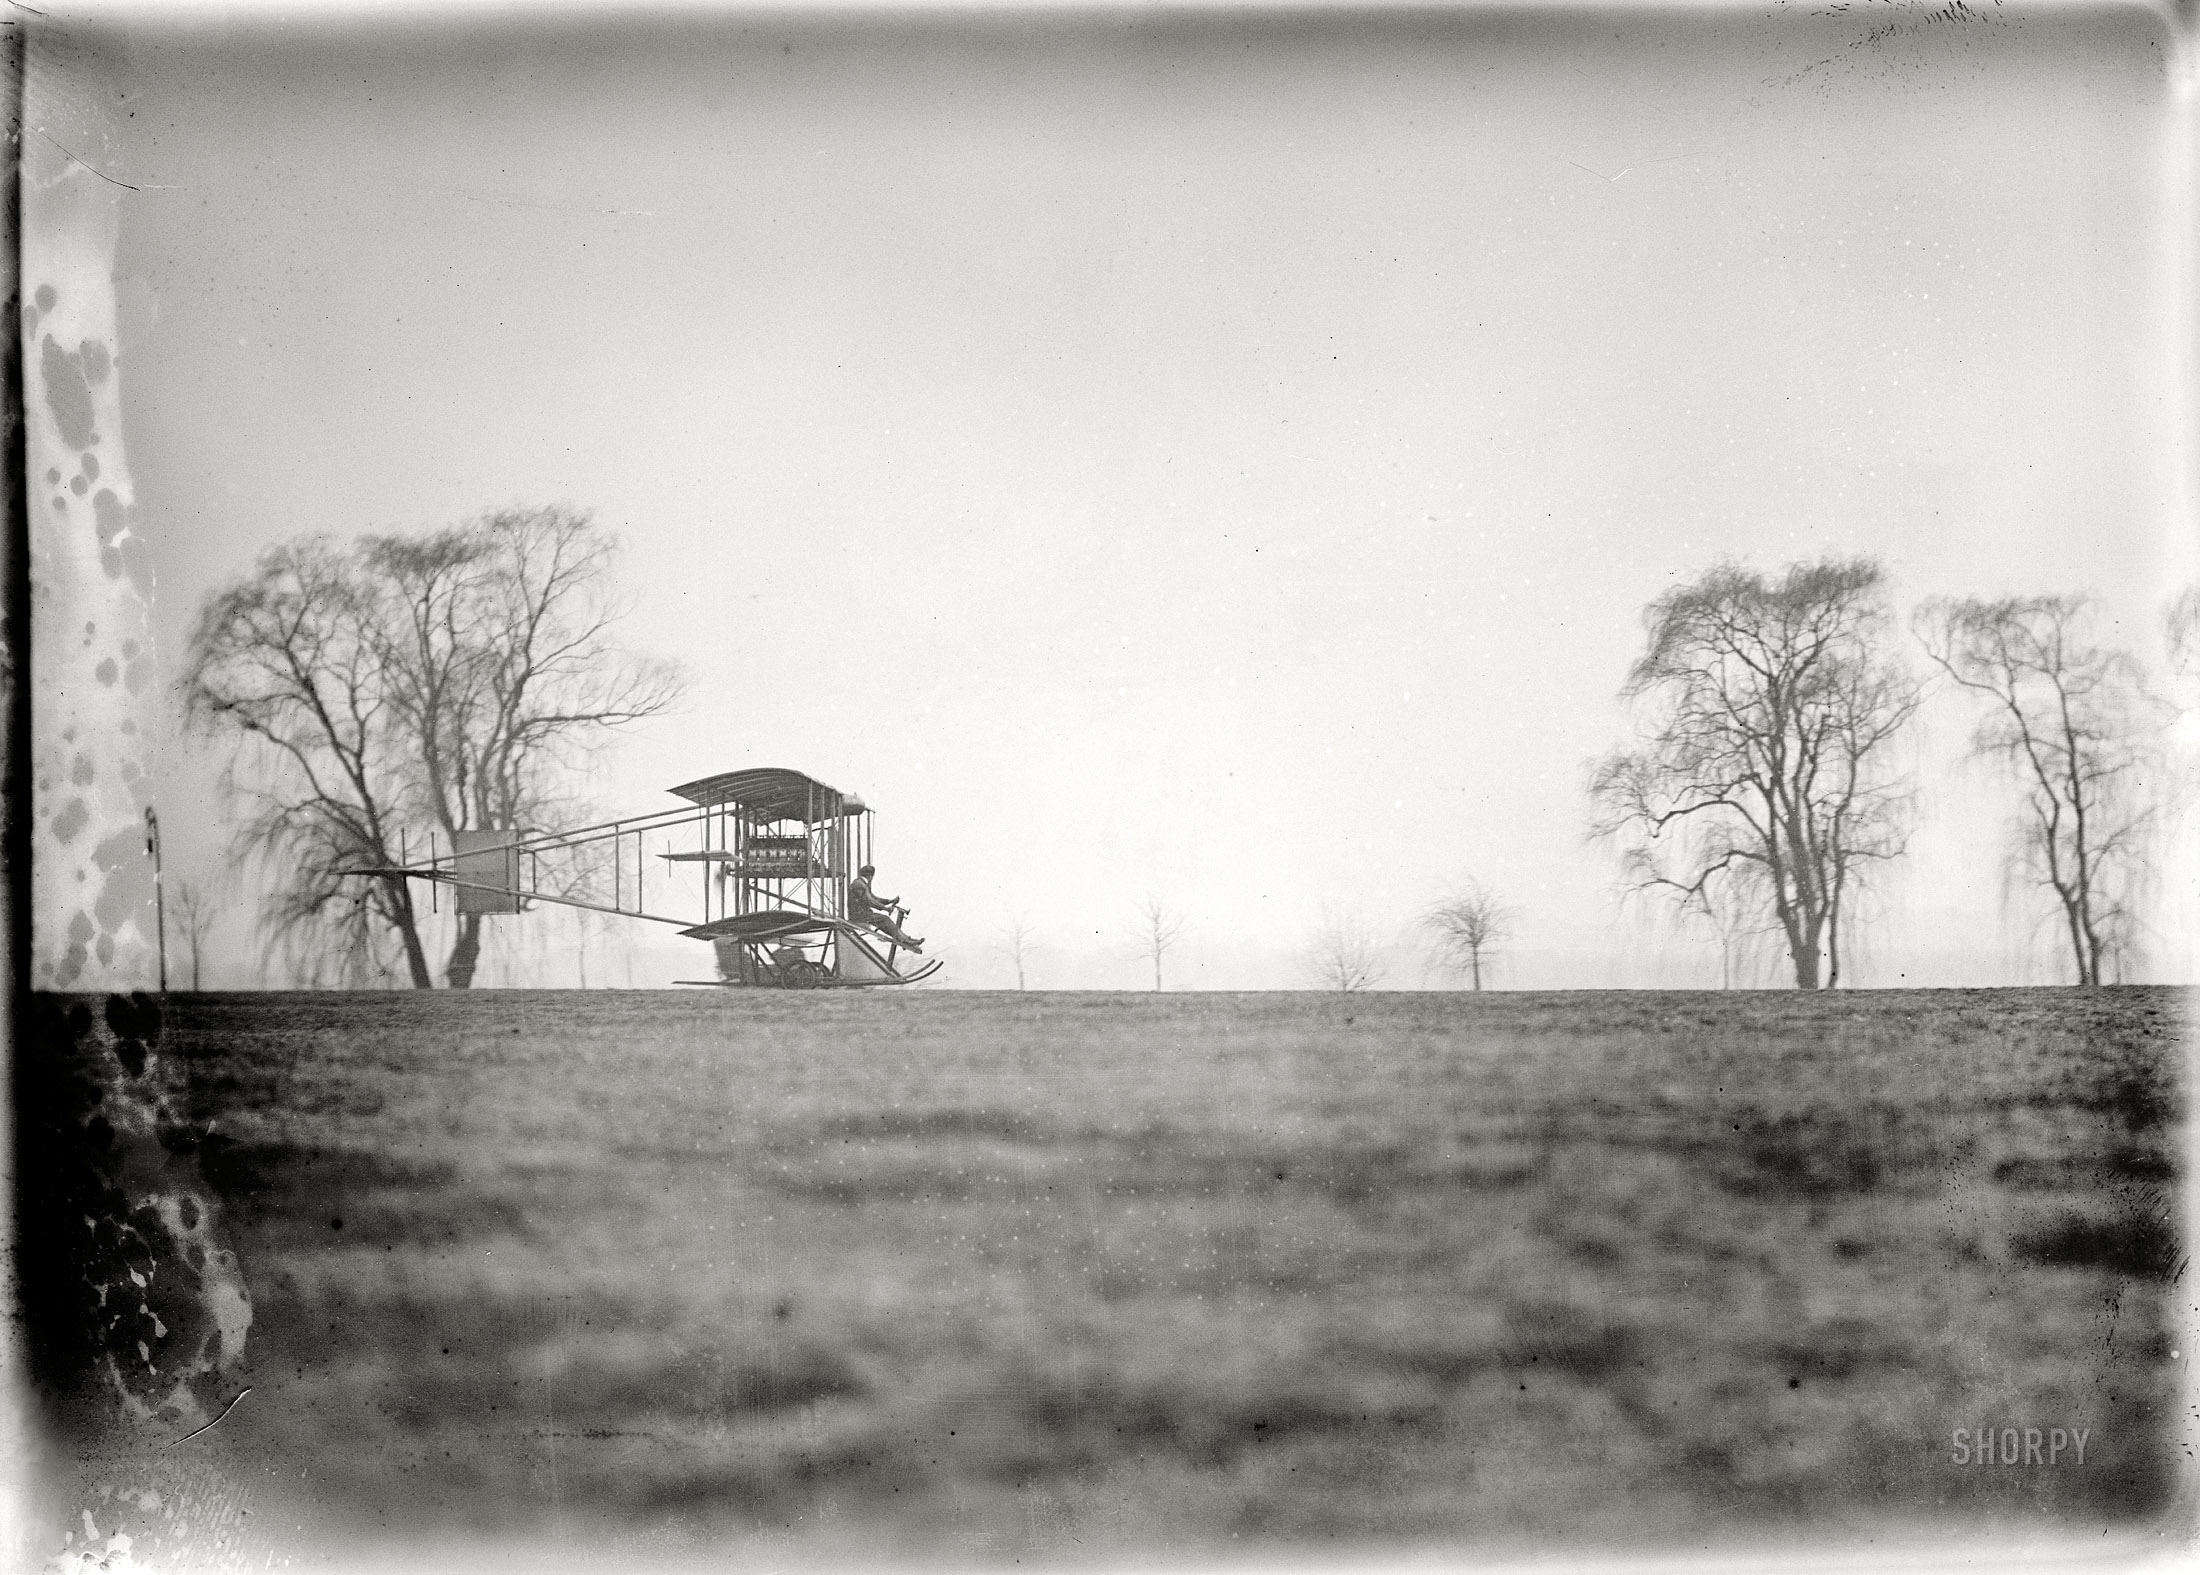 Washington, D.C., or vicinity circa 1911. "Flights and tests of Rex Smith plane flown by Antony Jannus." Aviation 100 years ago, and another look at the biplane seen here and here. Harris & Ewing Collection glass negative. View full size.